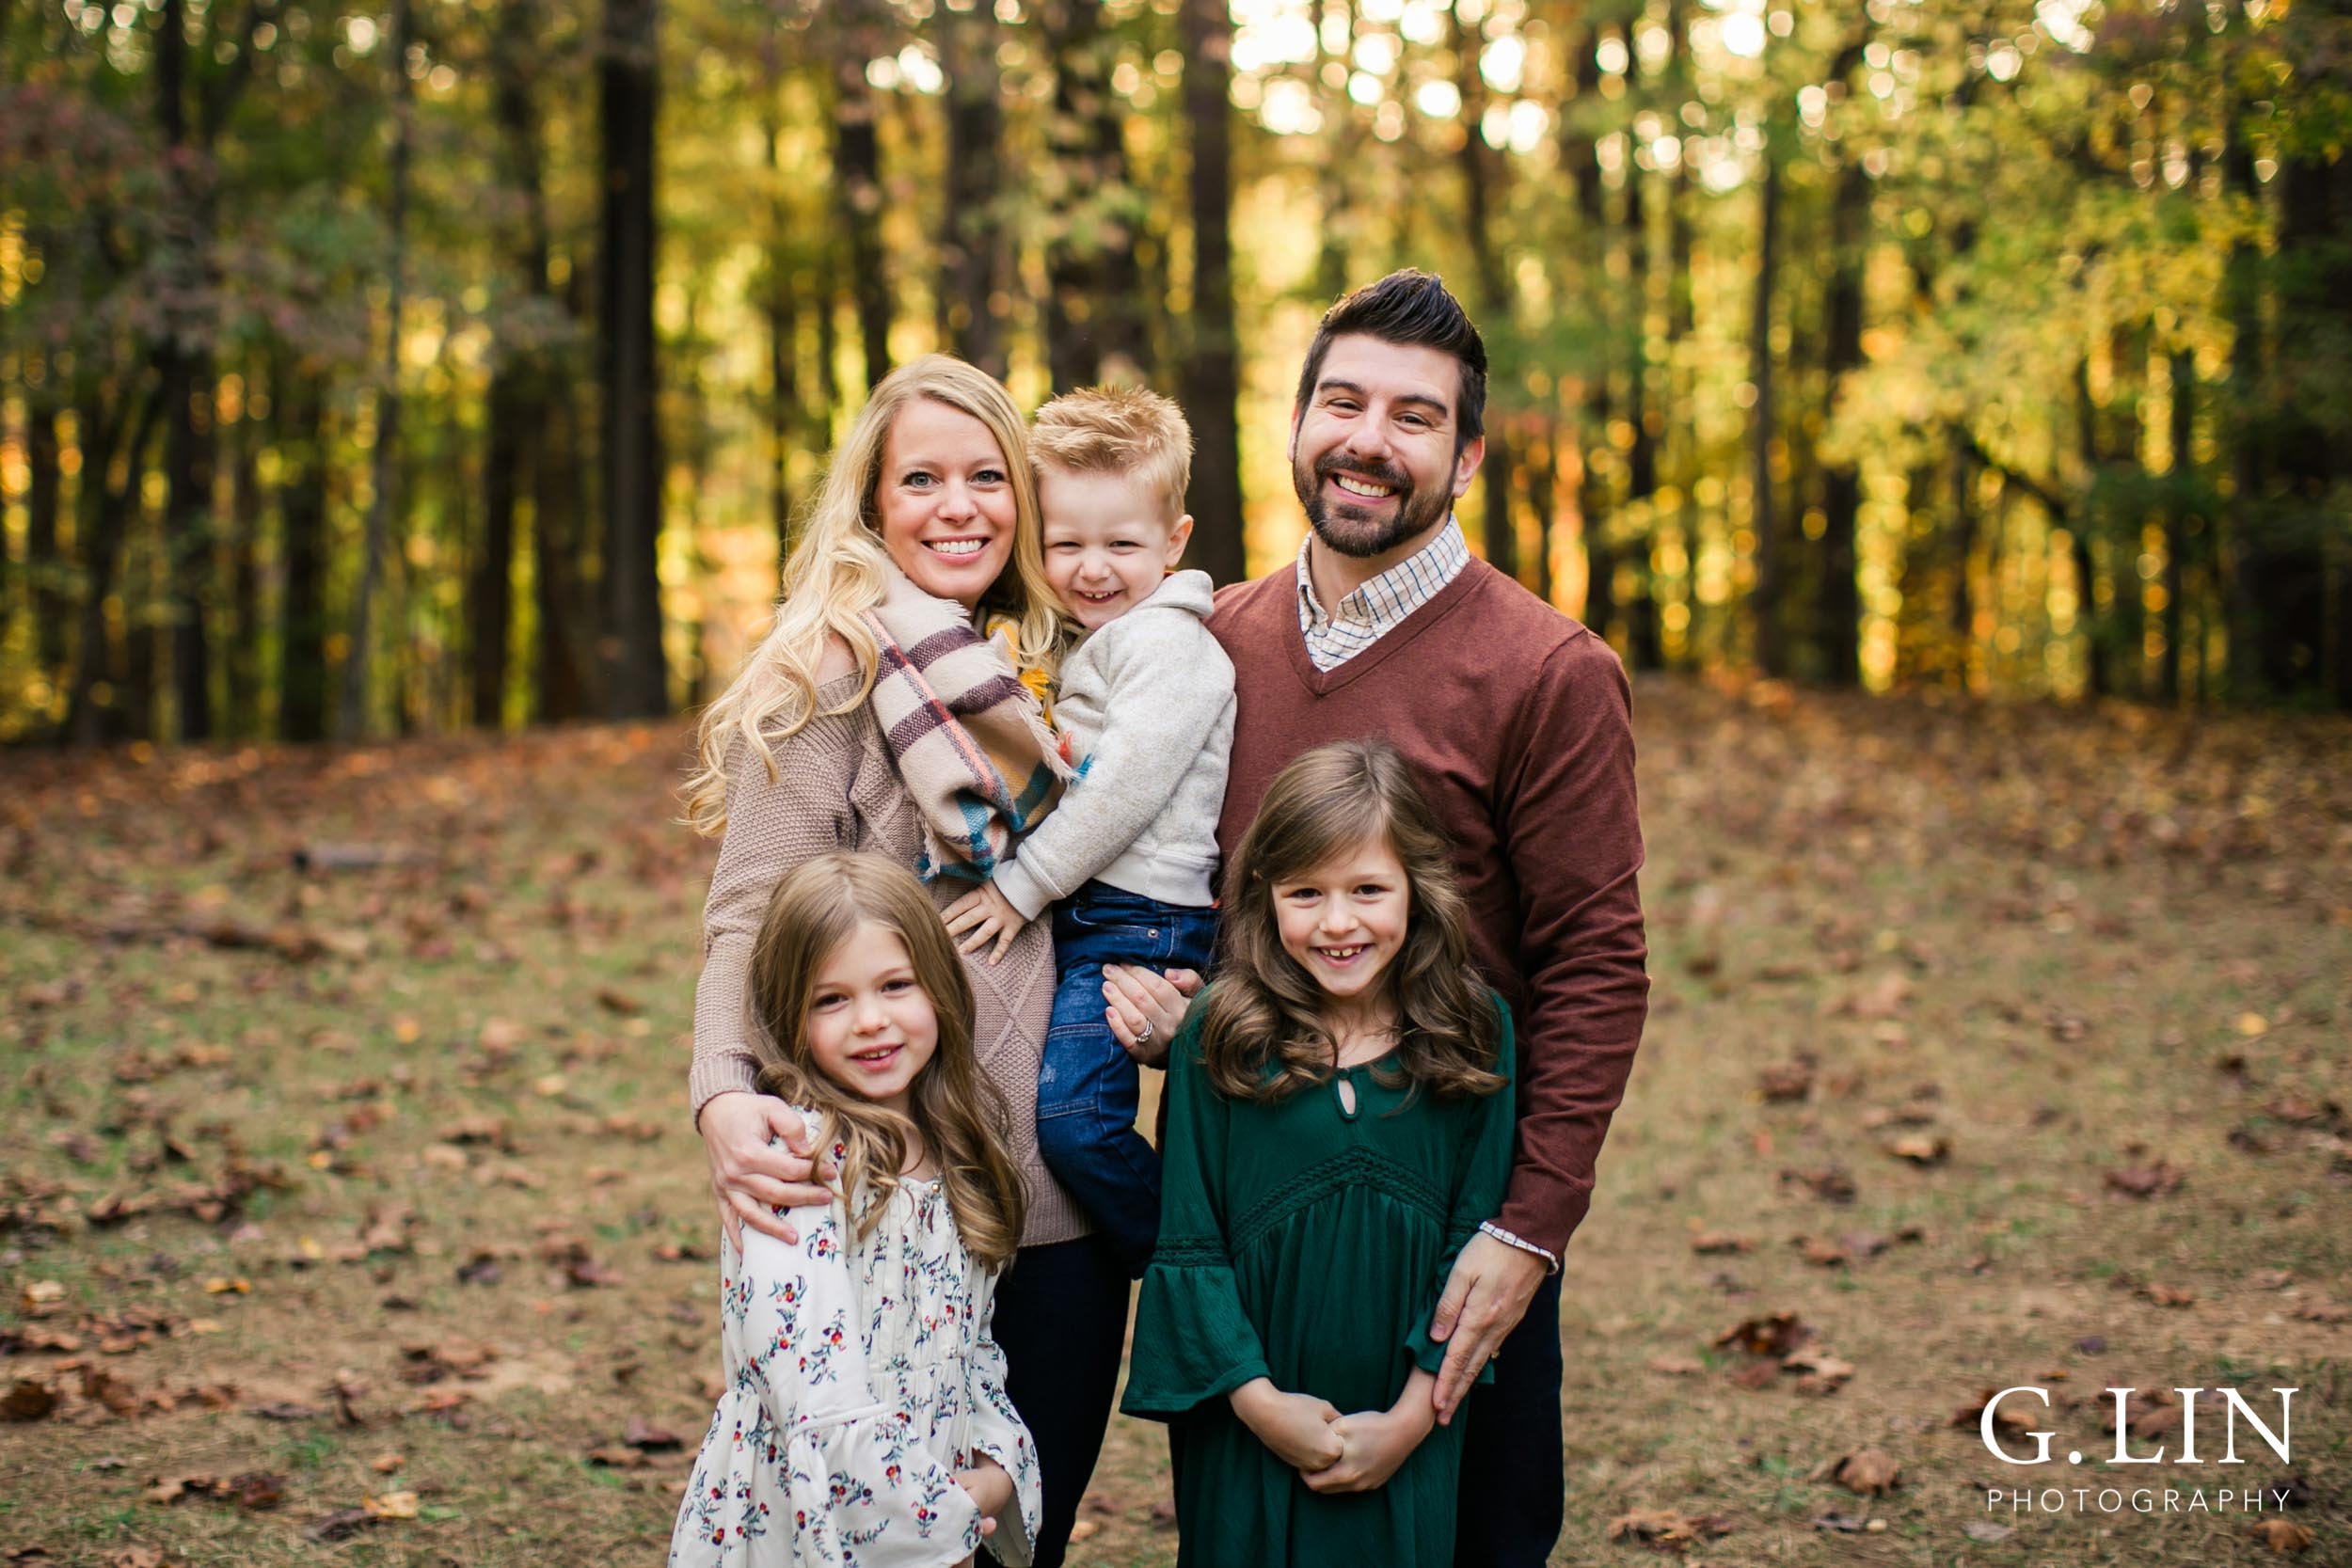 Raleigh Family Photographer | G. Lin Photography | Wide shot of family photo